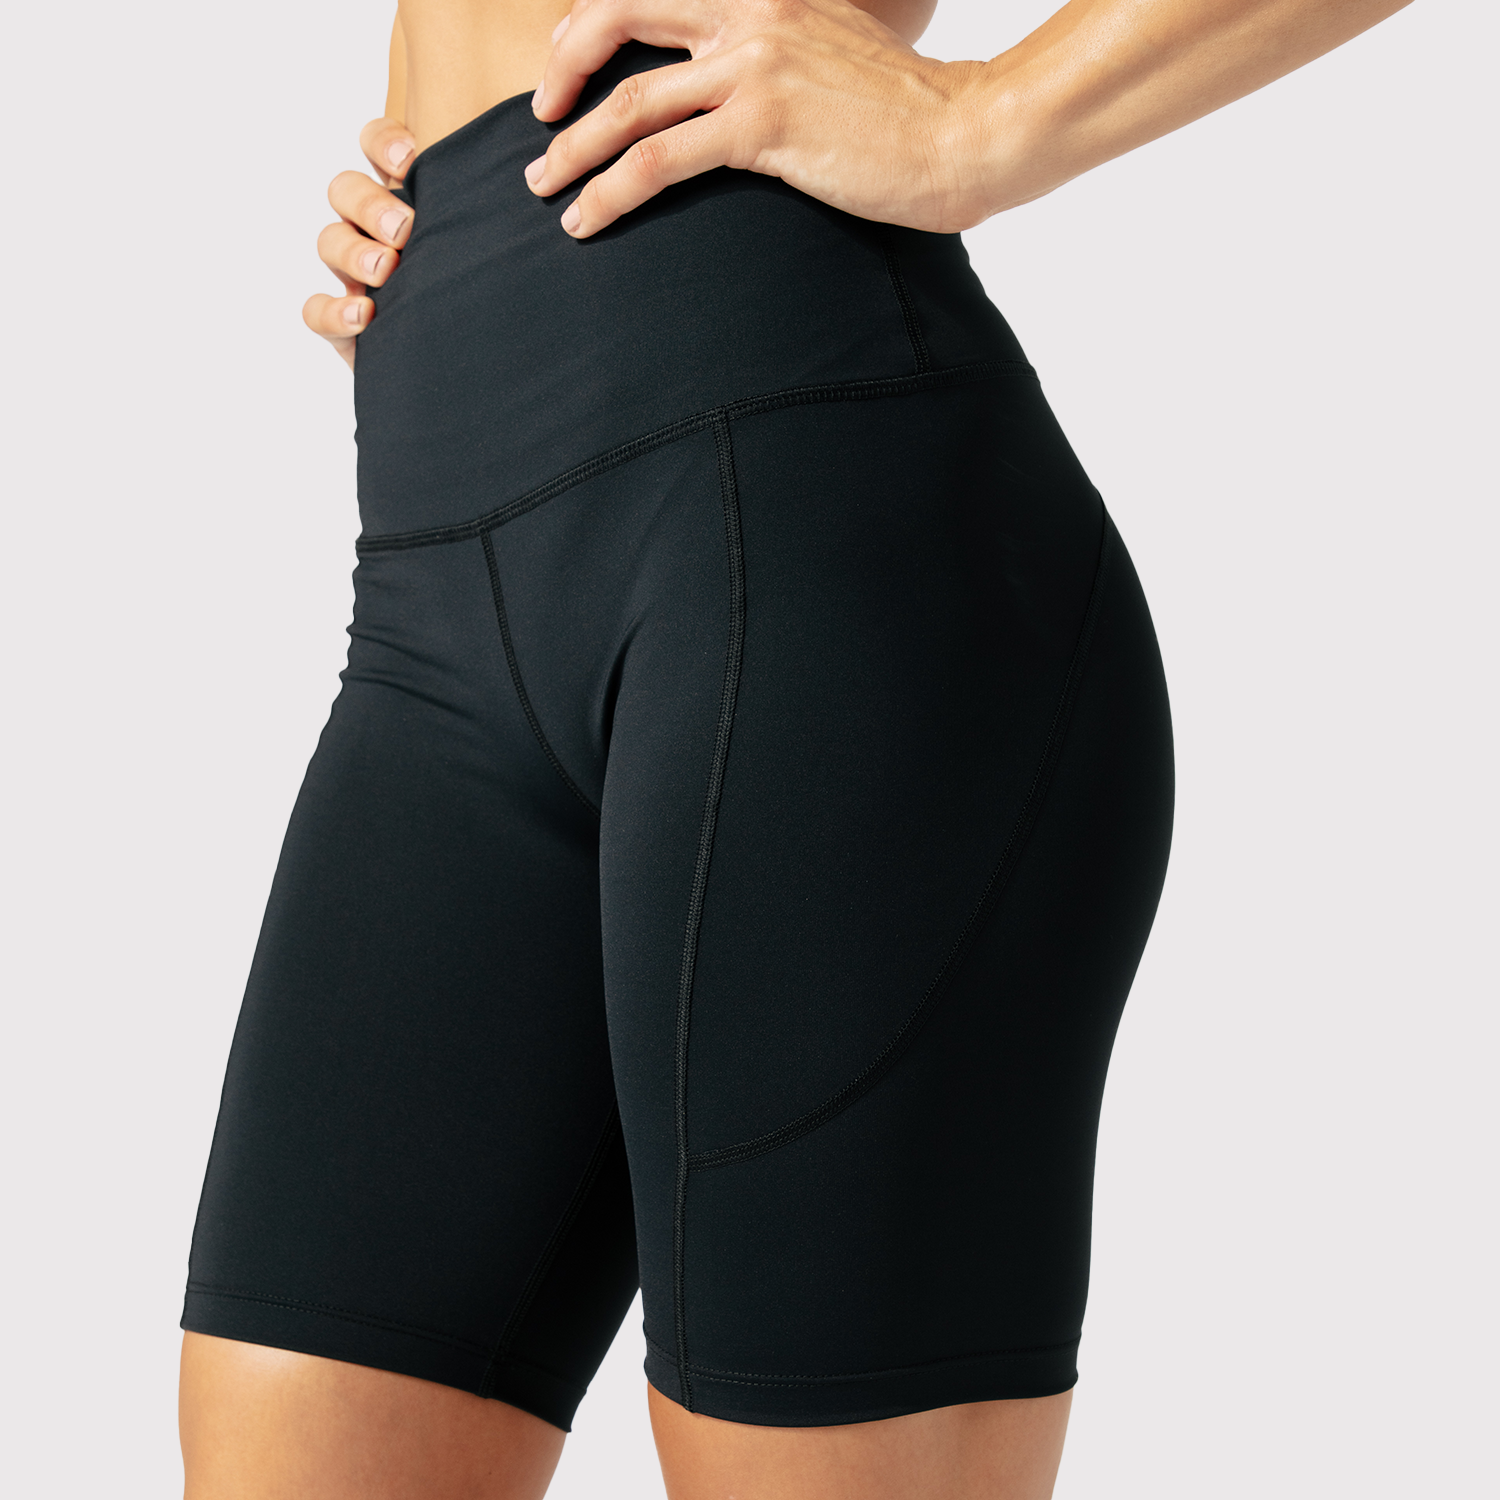 ZeroPoint Power Compression Shorts - Womens - Harris Active Sports